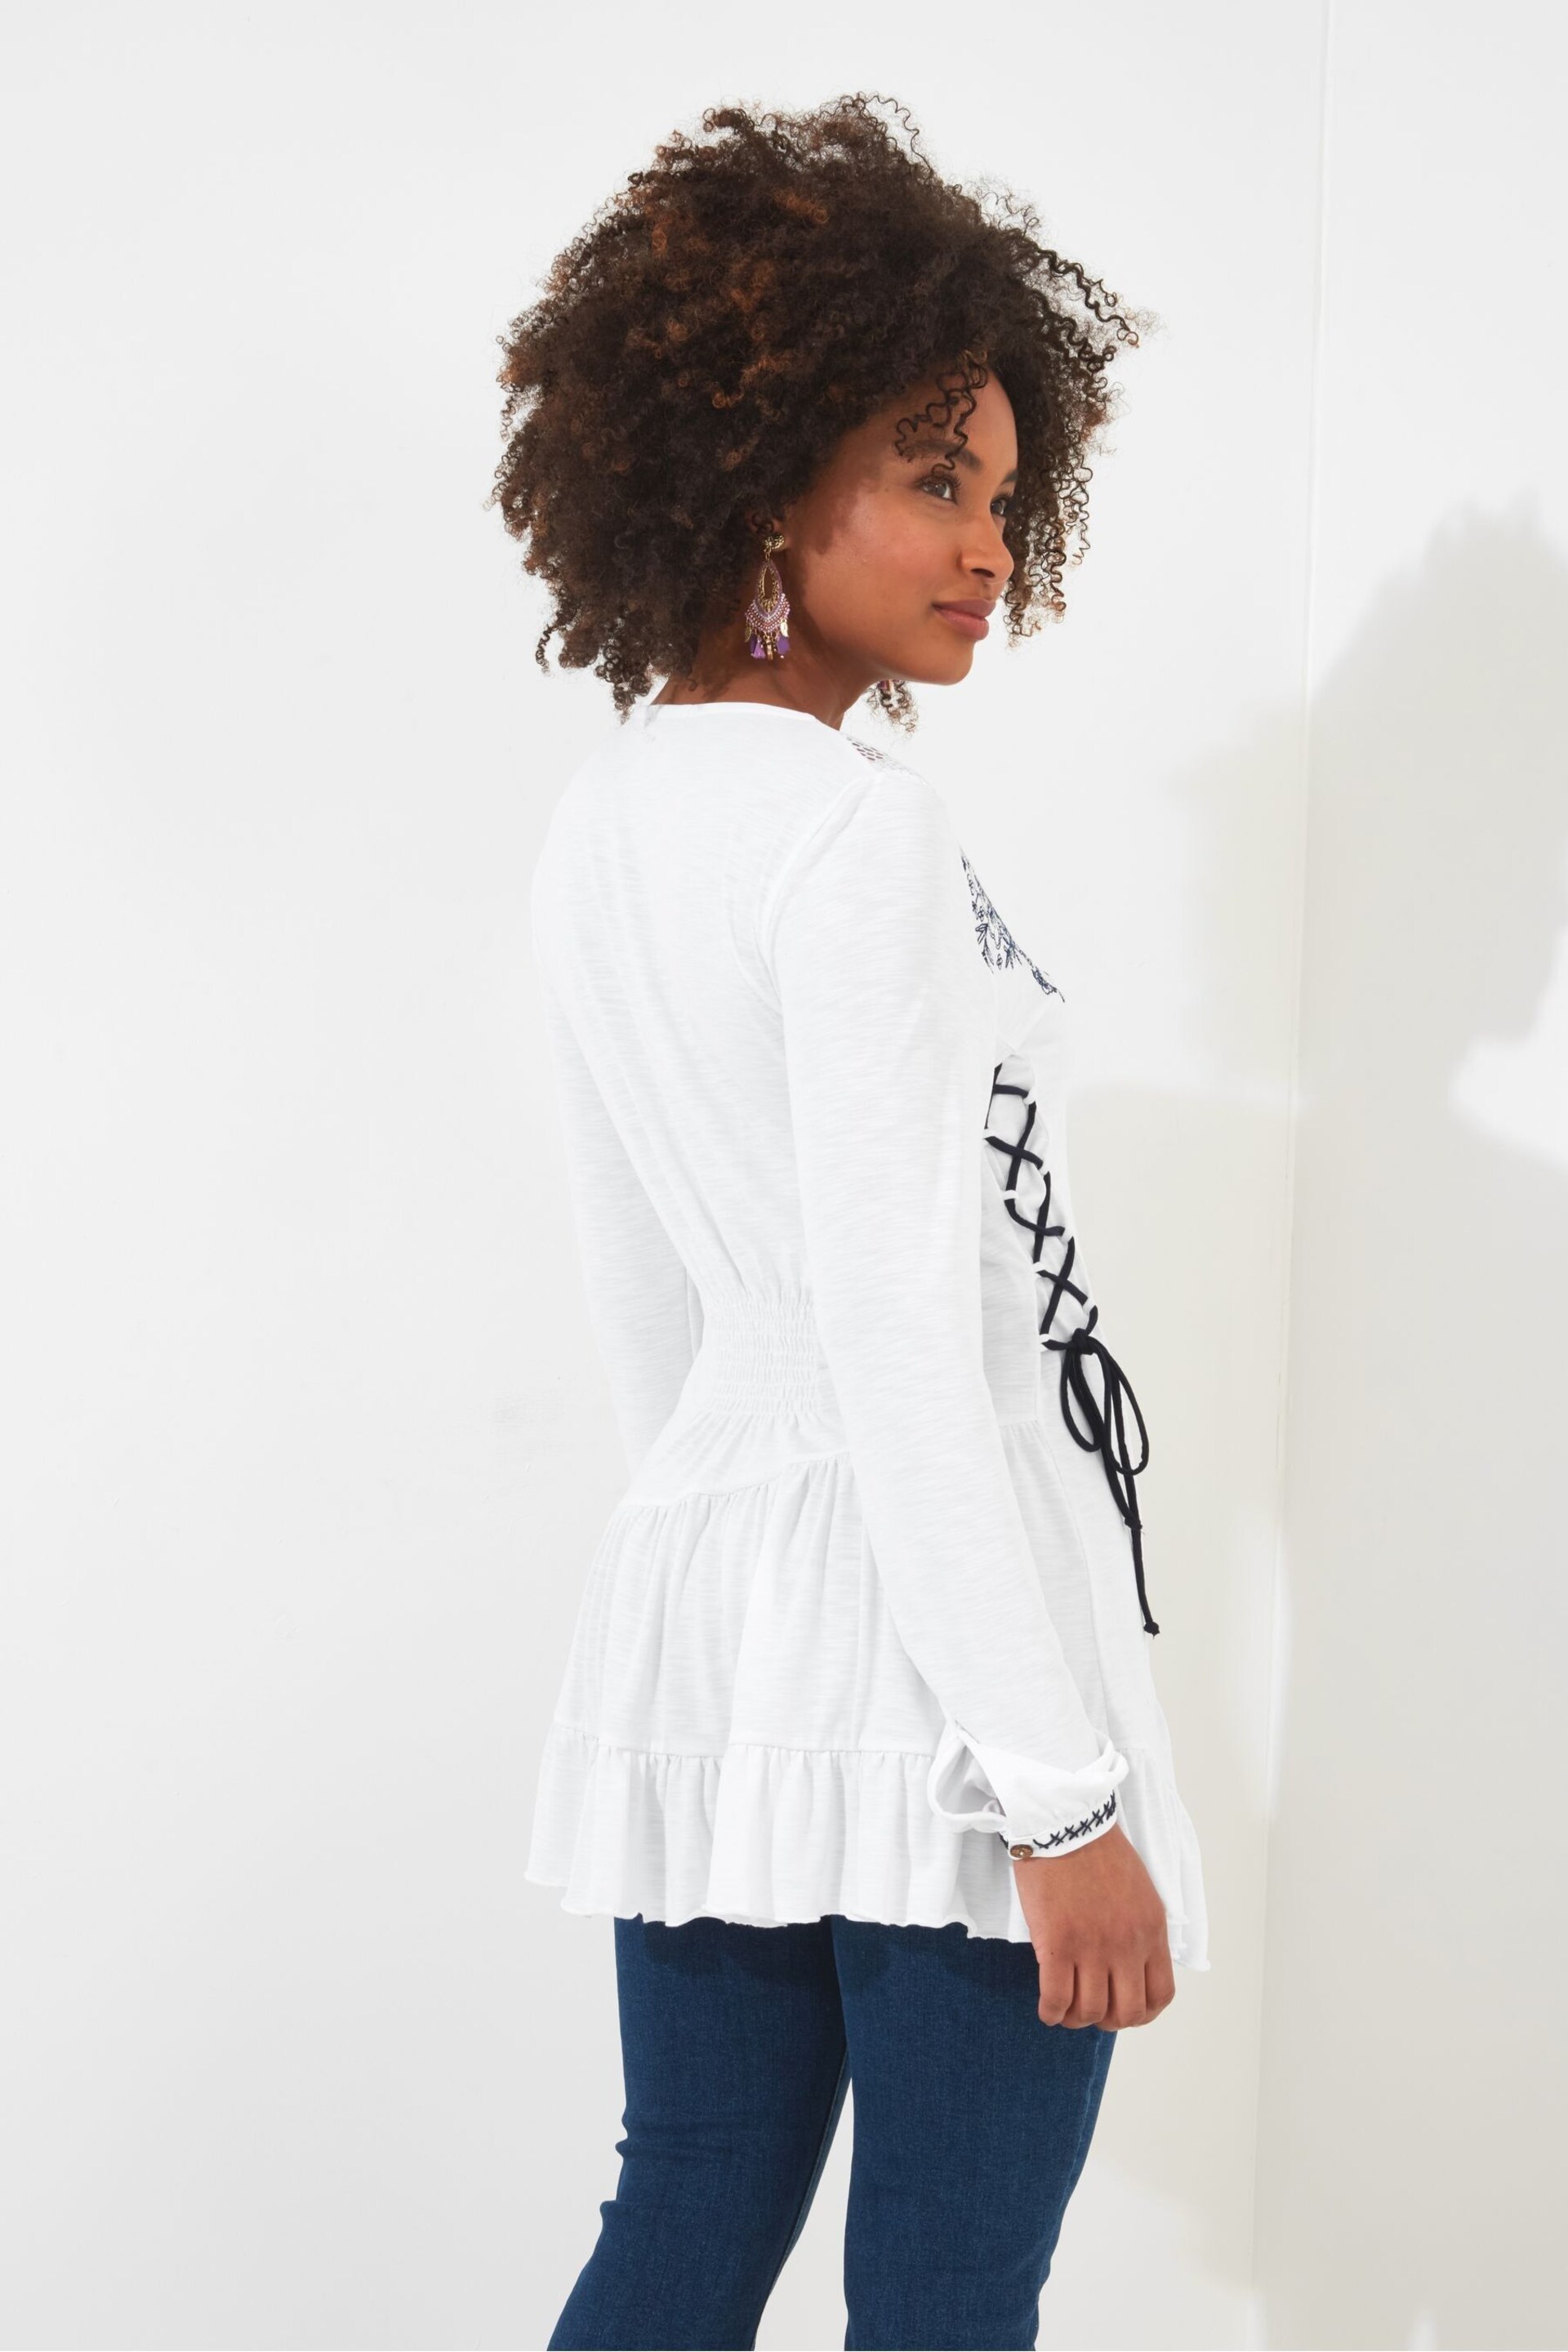 Joe Browns White Asymmetric Embroidered Top - Image 3 of 5